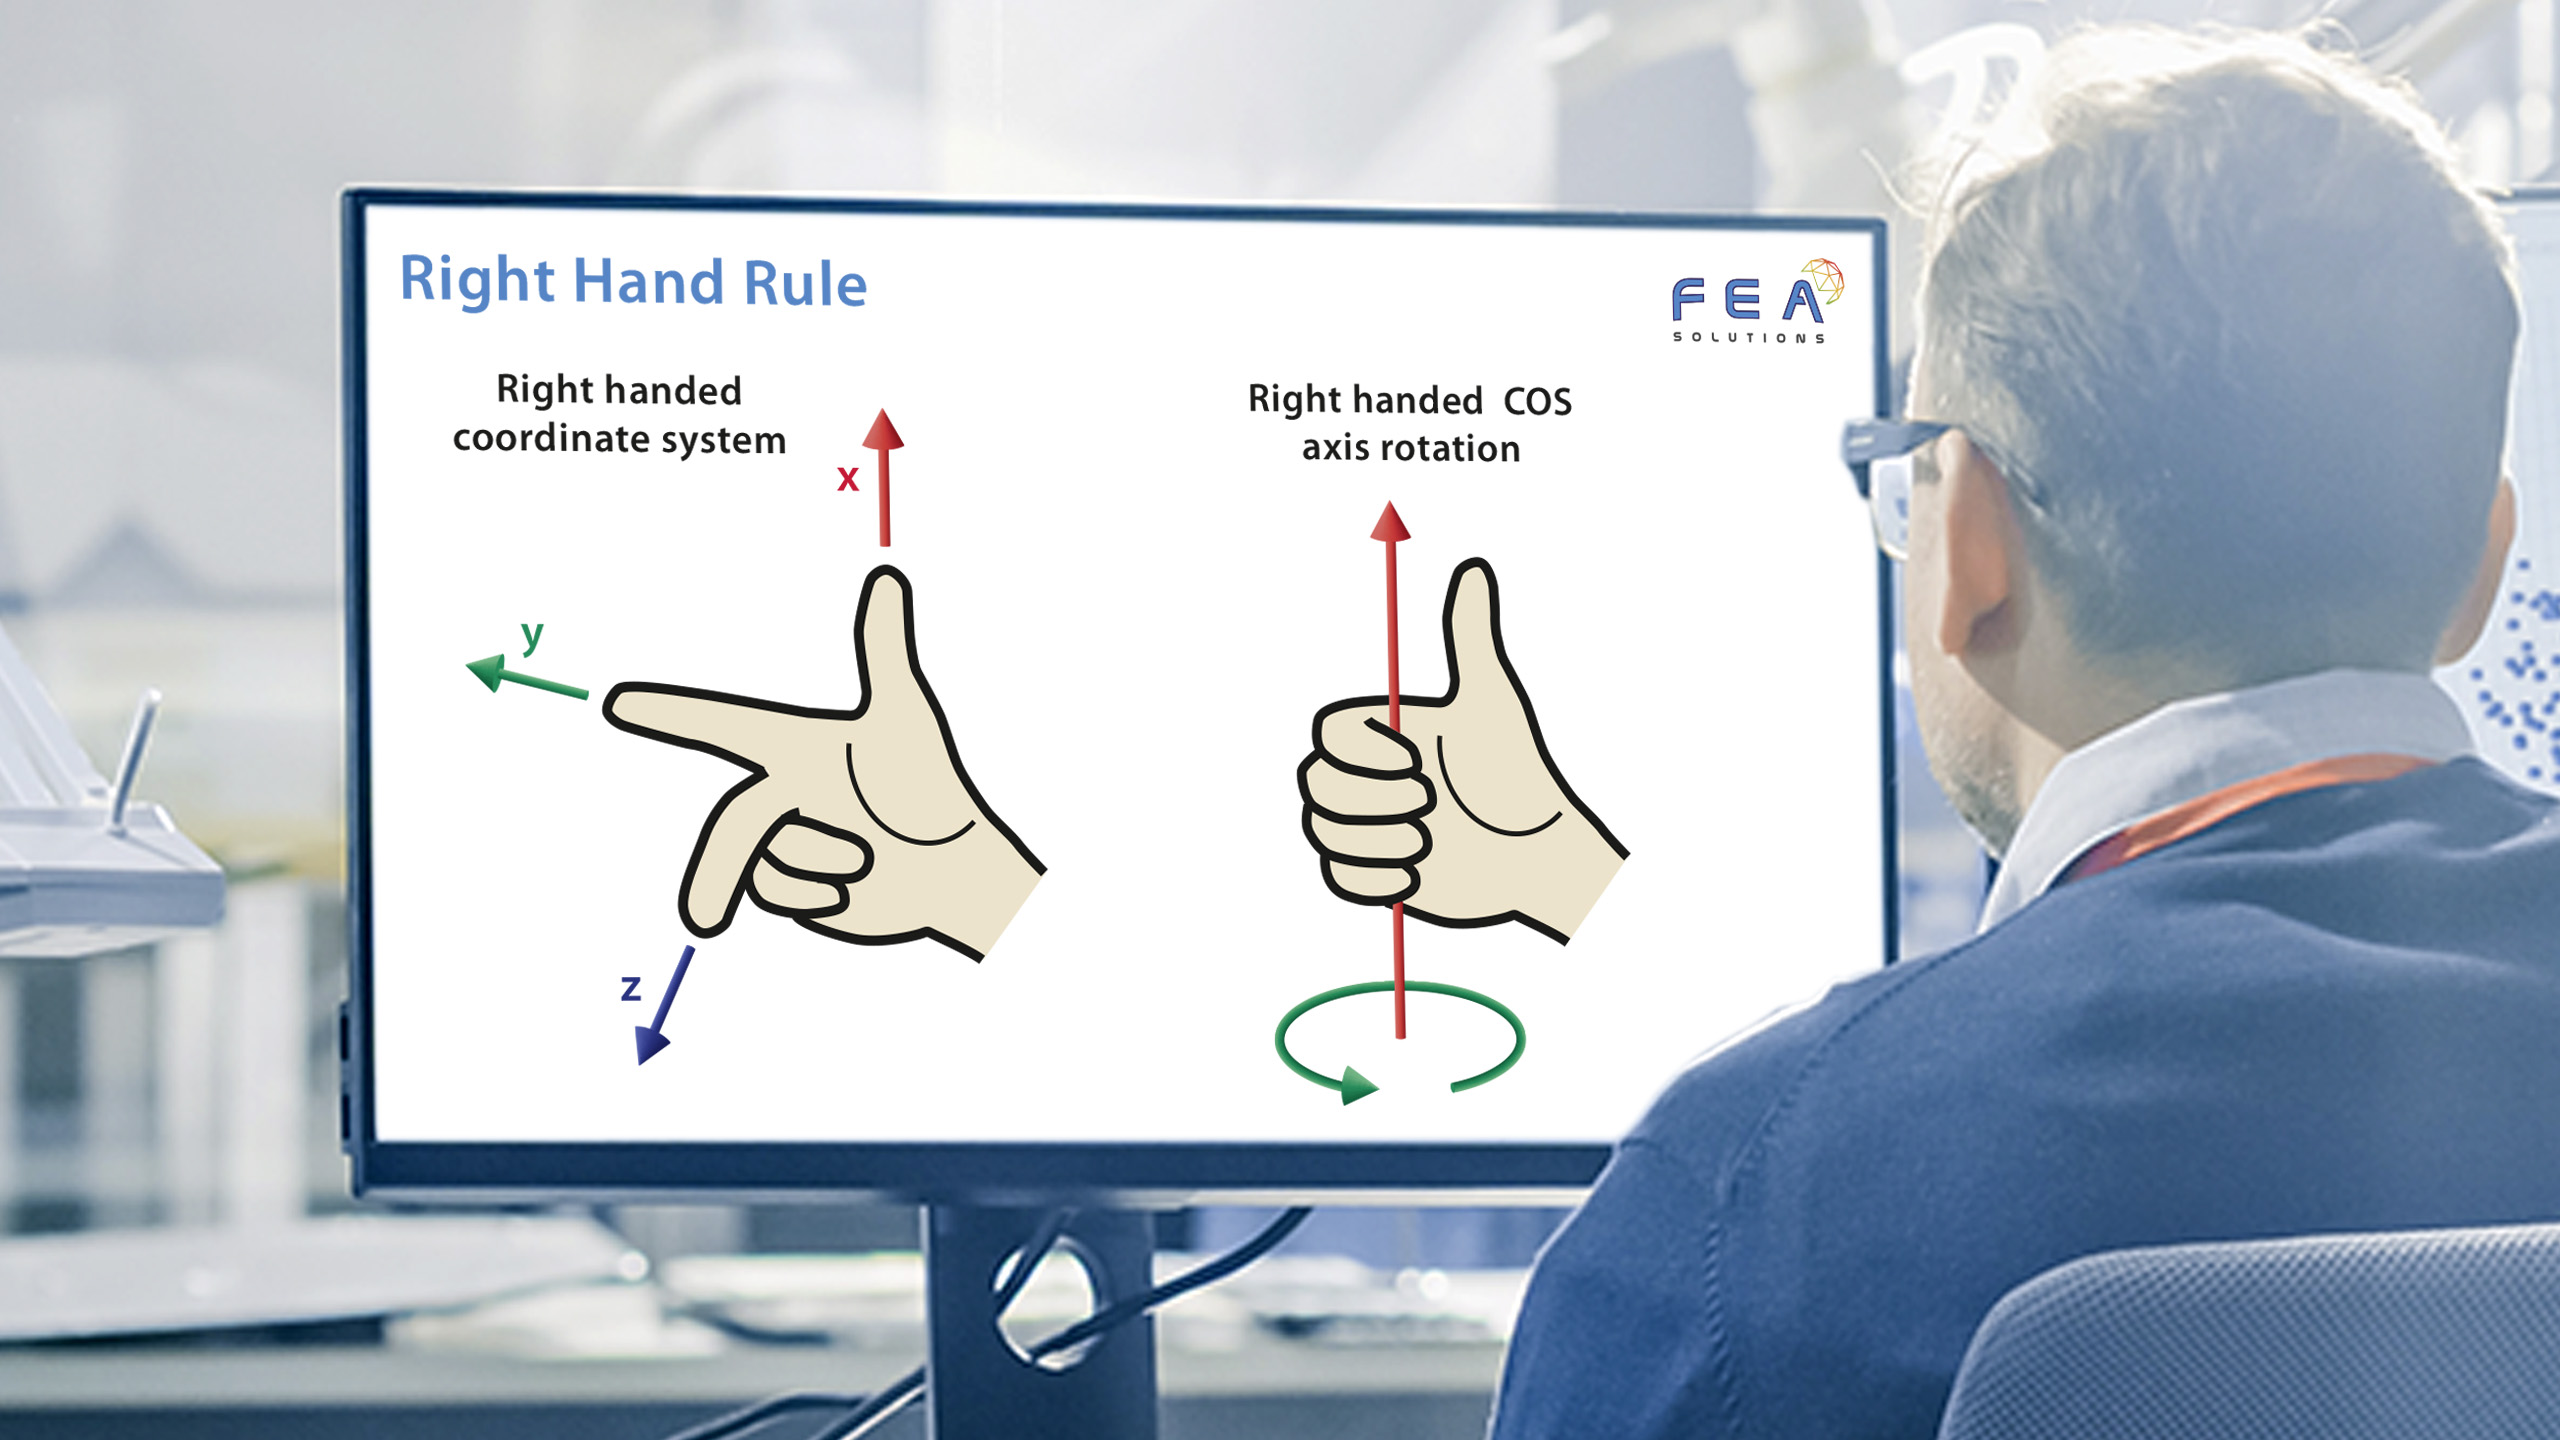 right hand rule diagram with fea solutions logo